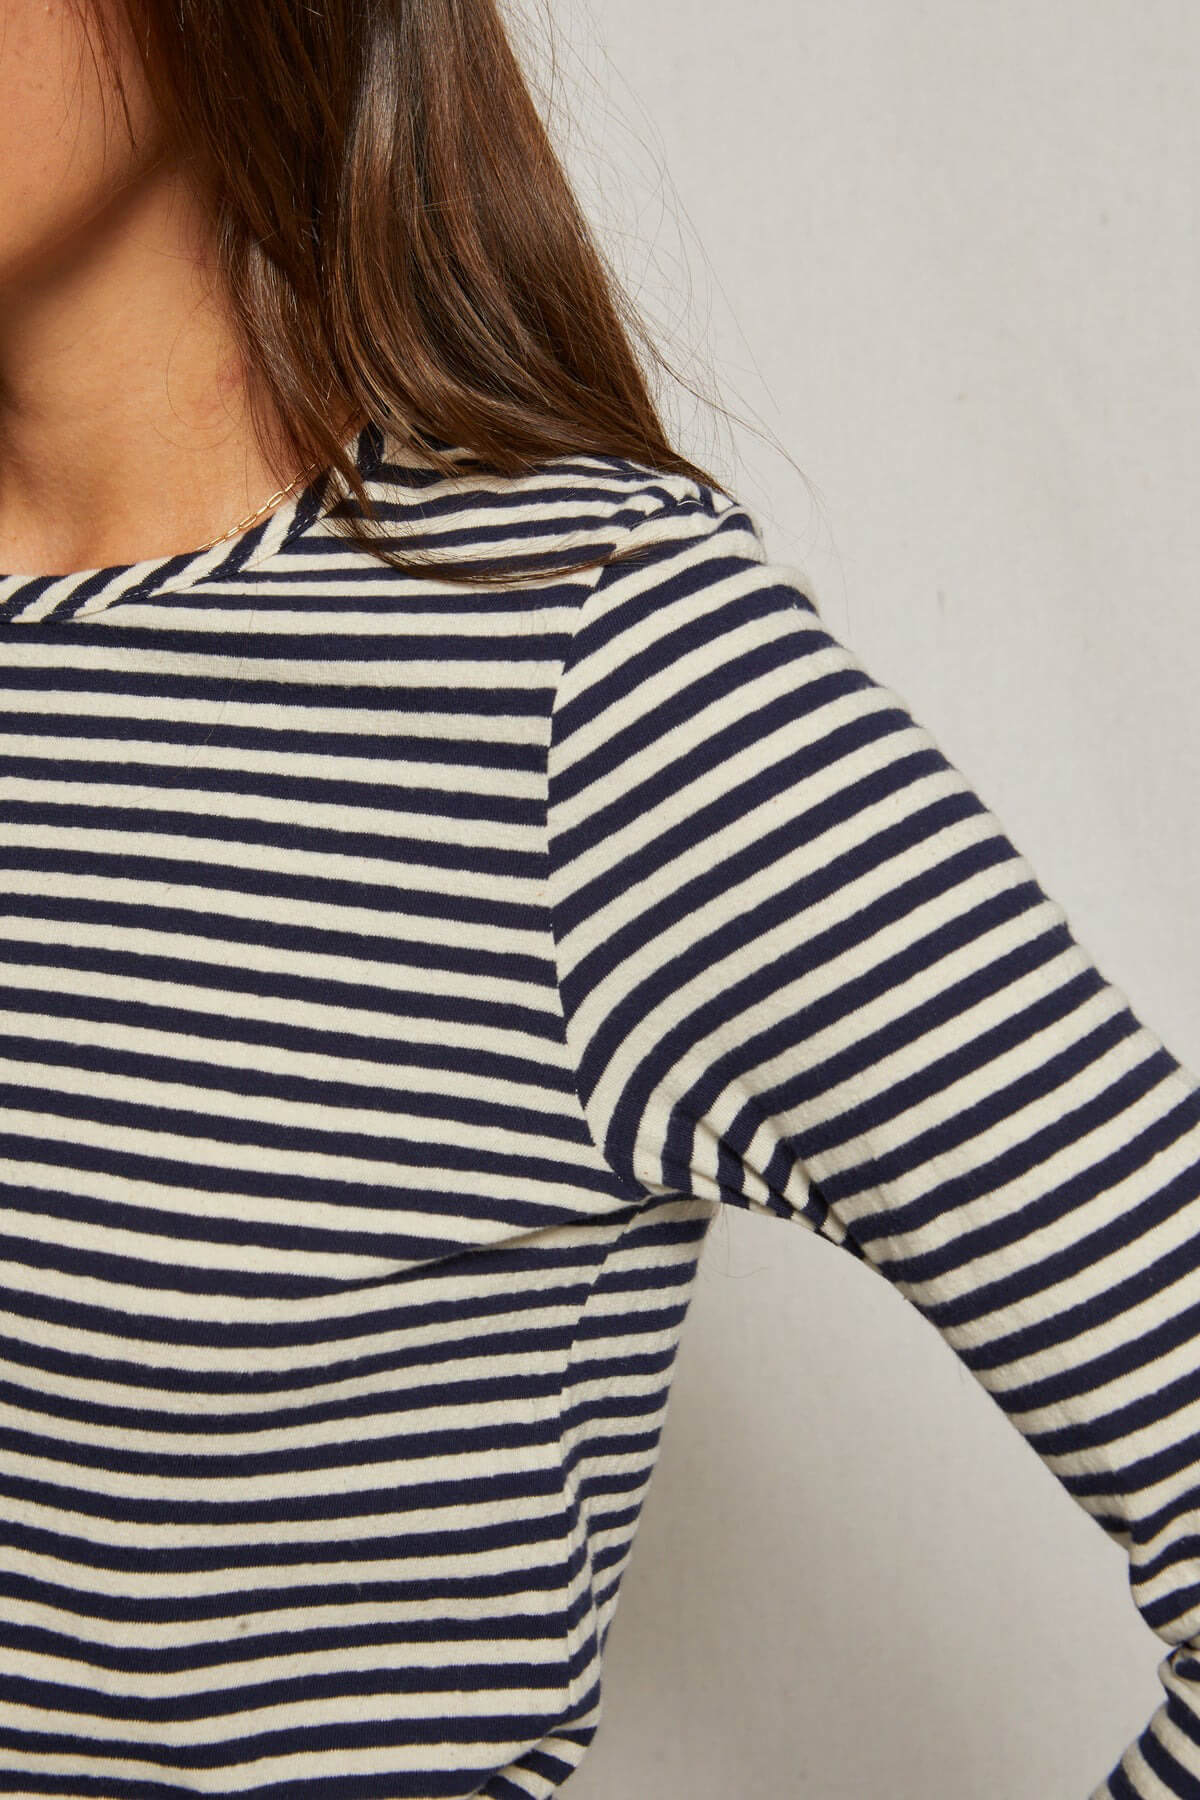 Perfect White Tee Dylan long sleeve crew in navy white stripe